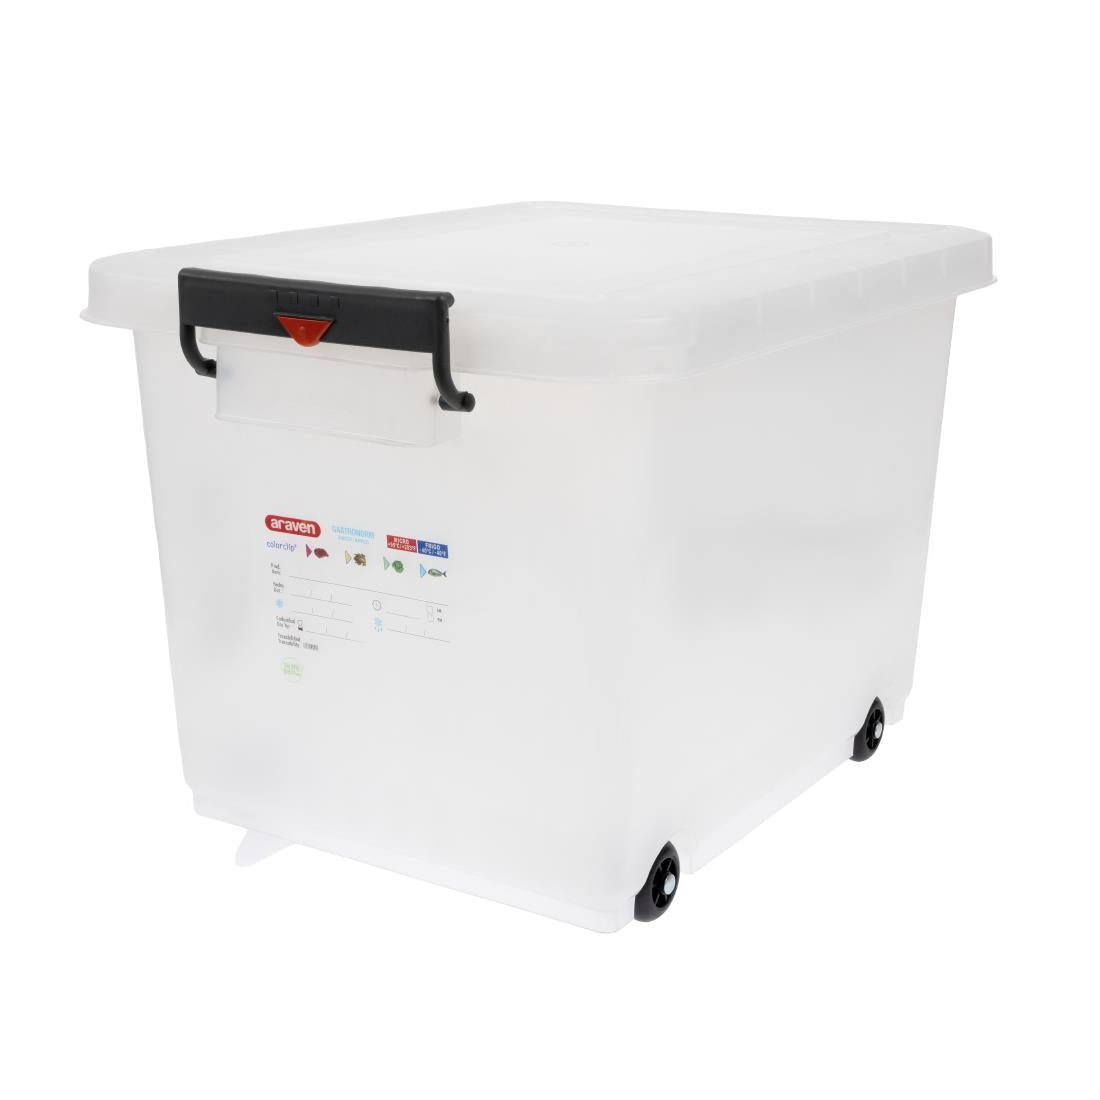 Araven Mobile Food Storage Bin with Lid JD Catering Equipment Solutions Ltd